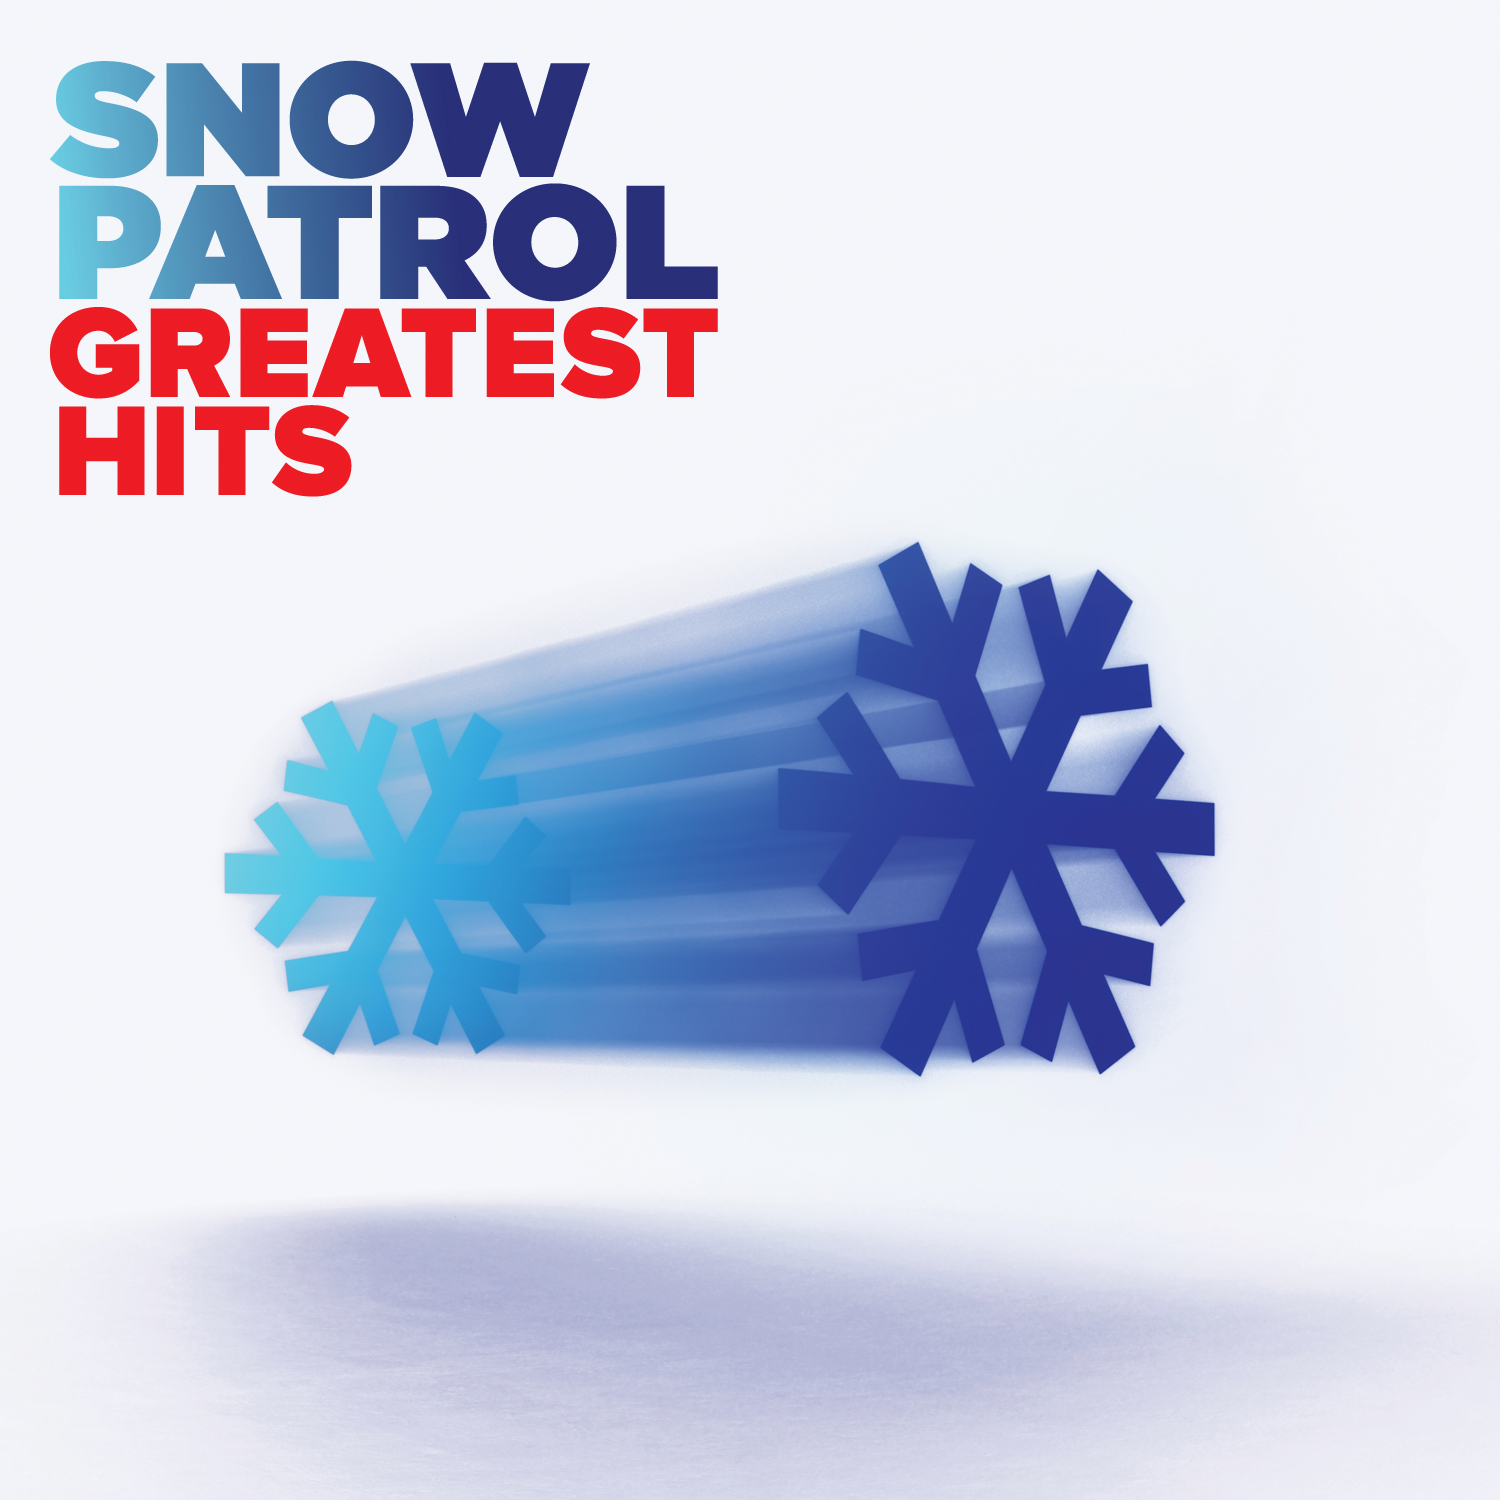 Download SNOW PATROL's GREATEST HITS SET FOR MAY 14th RELEASE ...